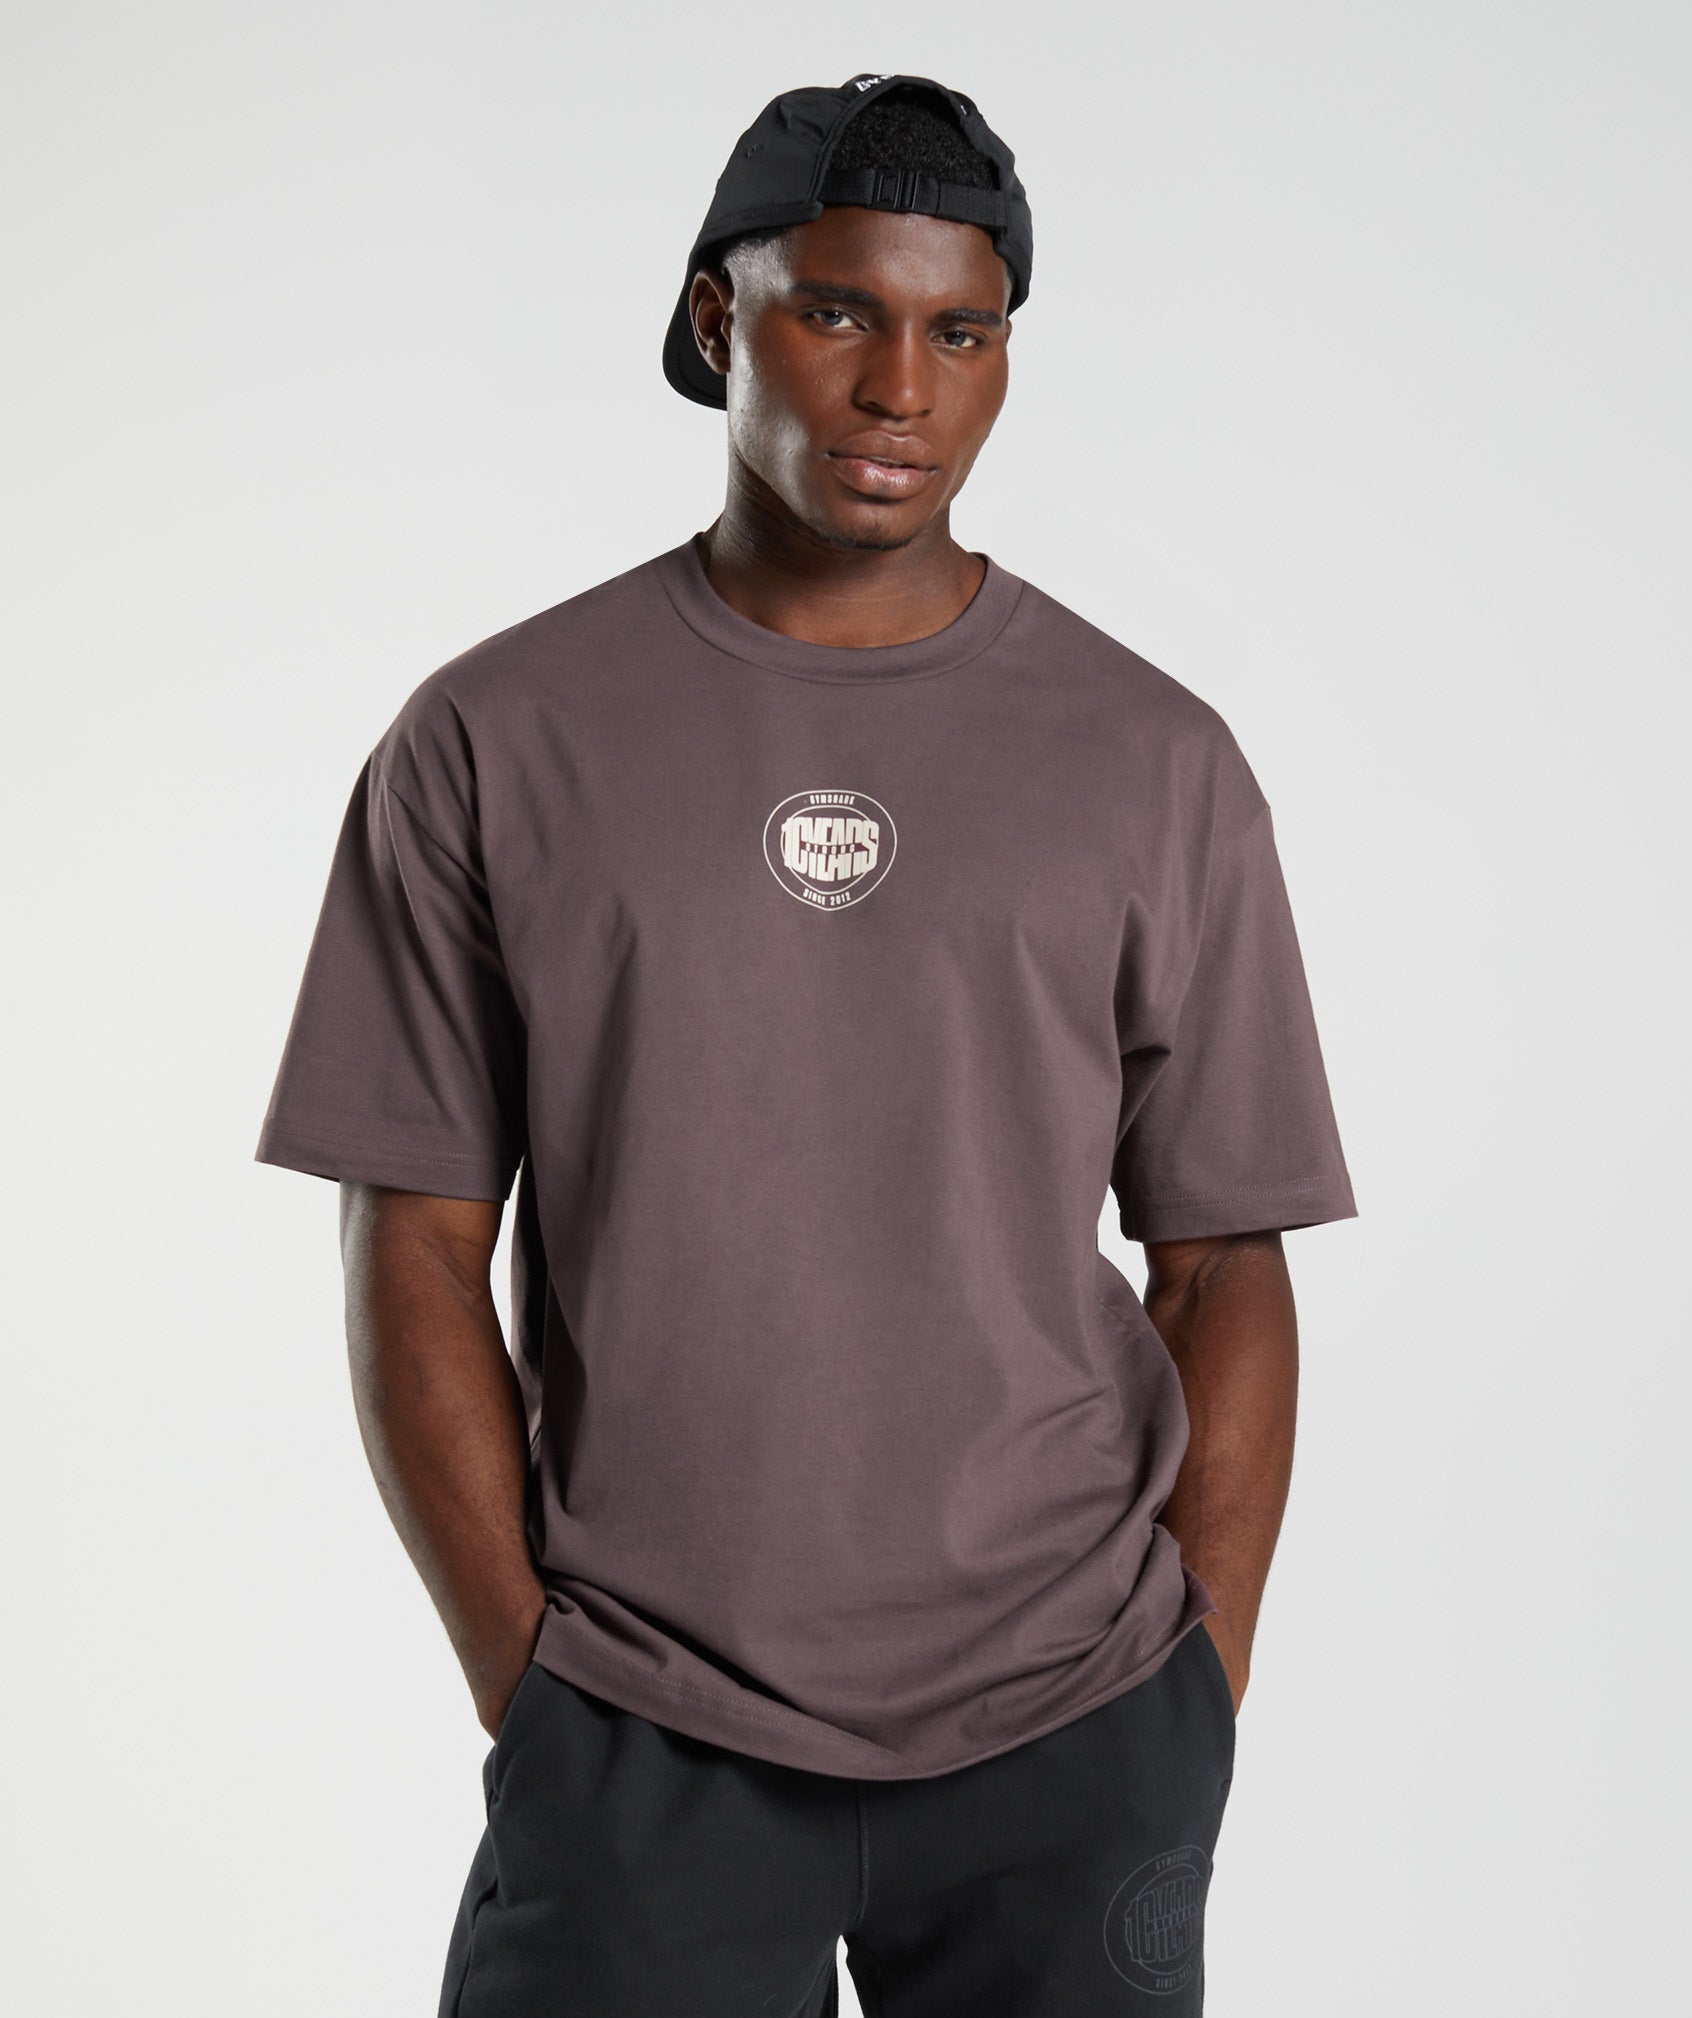 GS10 Year Oversized T-Shirt in Chocolate Brown